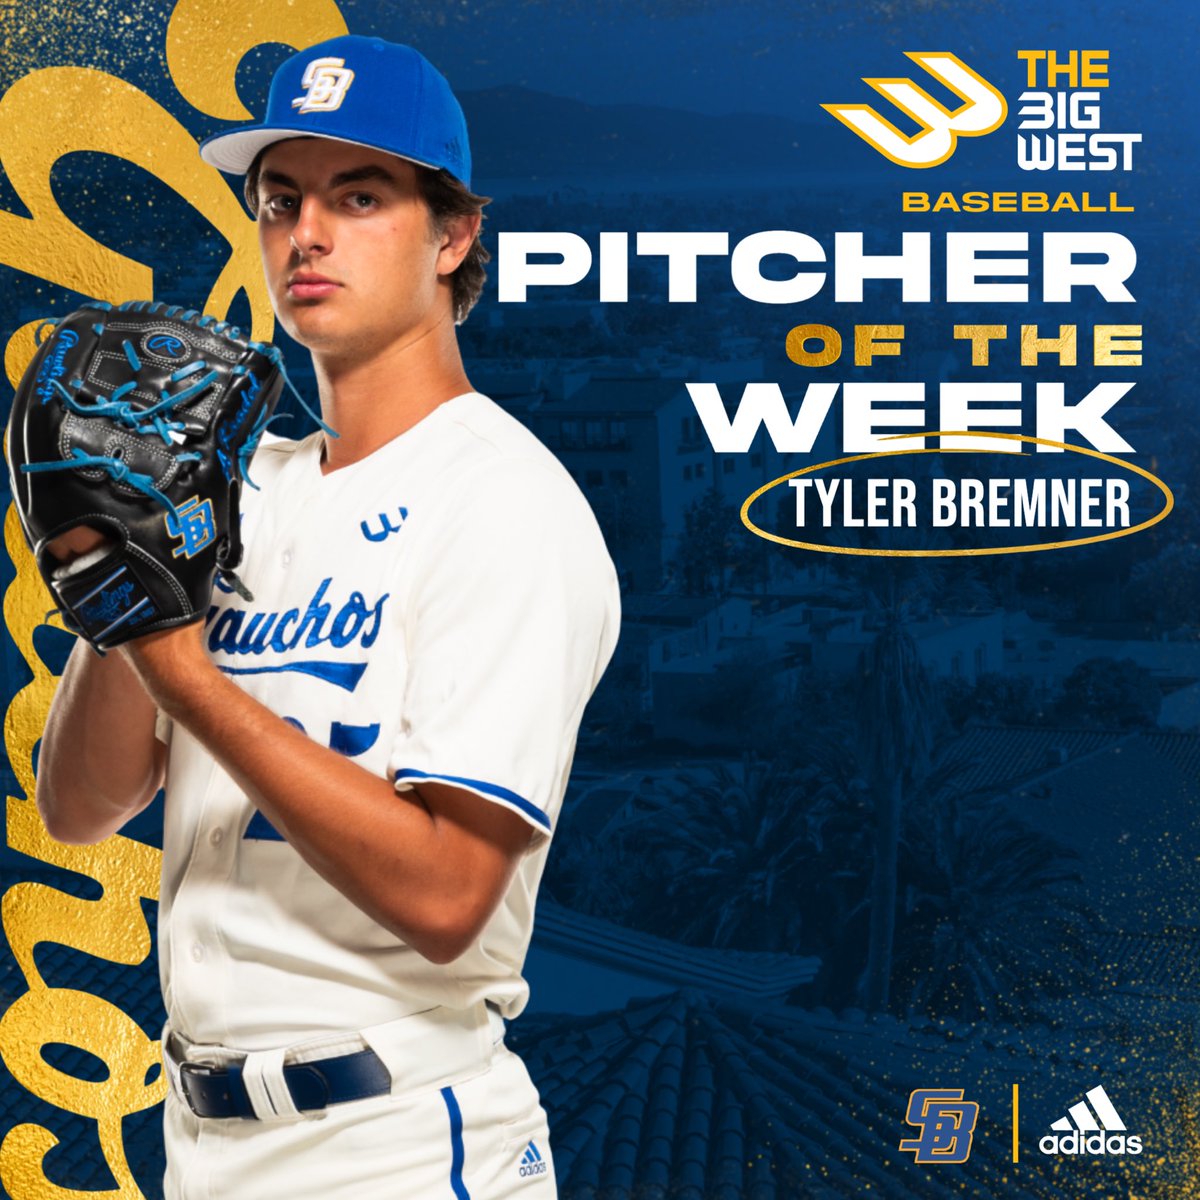 Tyler Bremner is your Big West Pitcher of the Week! In his eight innings pitched, Bremner shutout the Titans giving up just two hits and one walk to close out Game 3 and secure Santa Barbara’s third consecutive series sweep! #GoChos